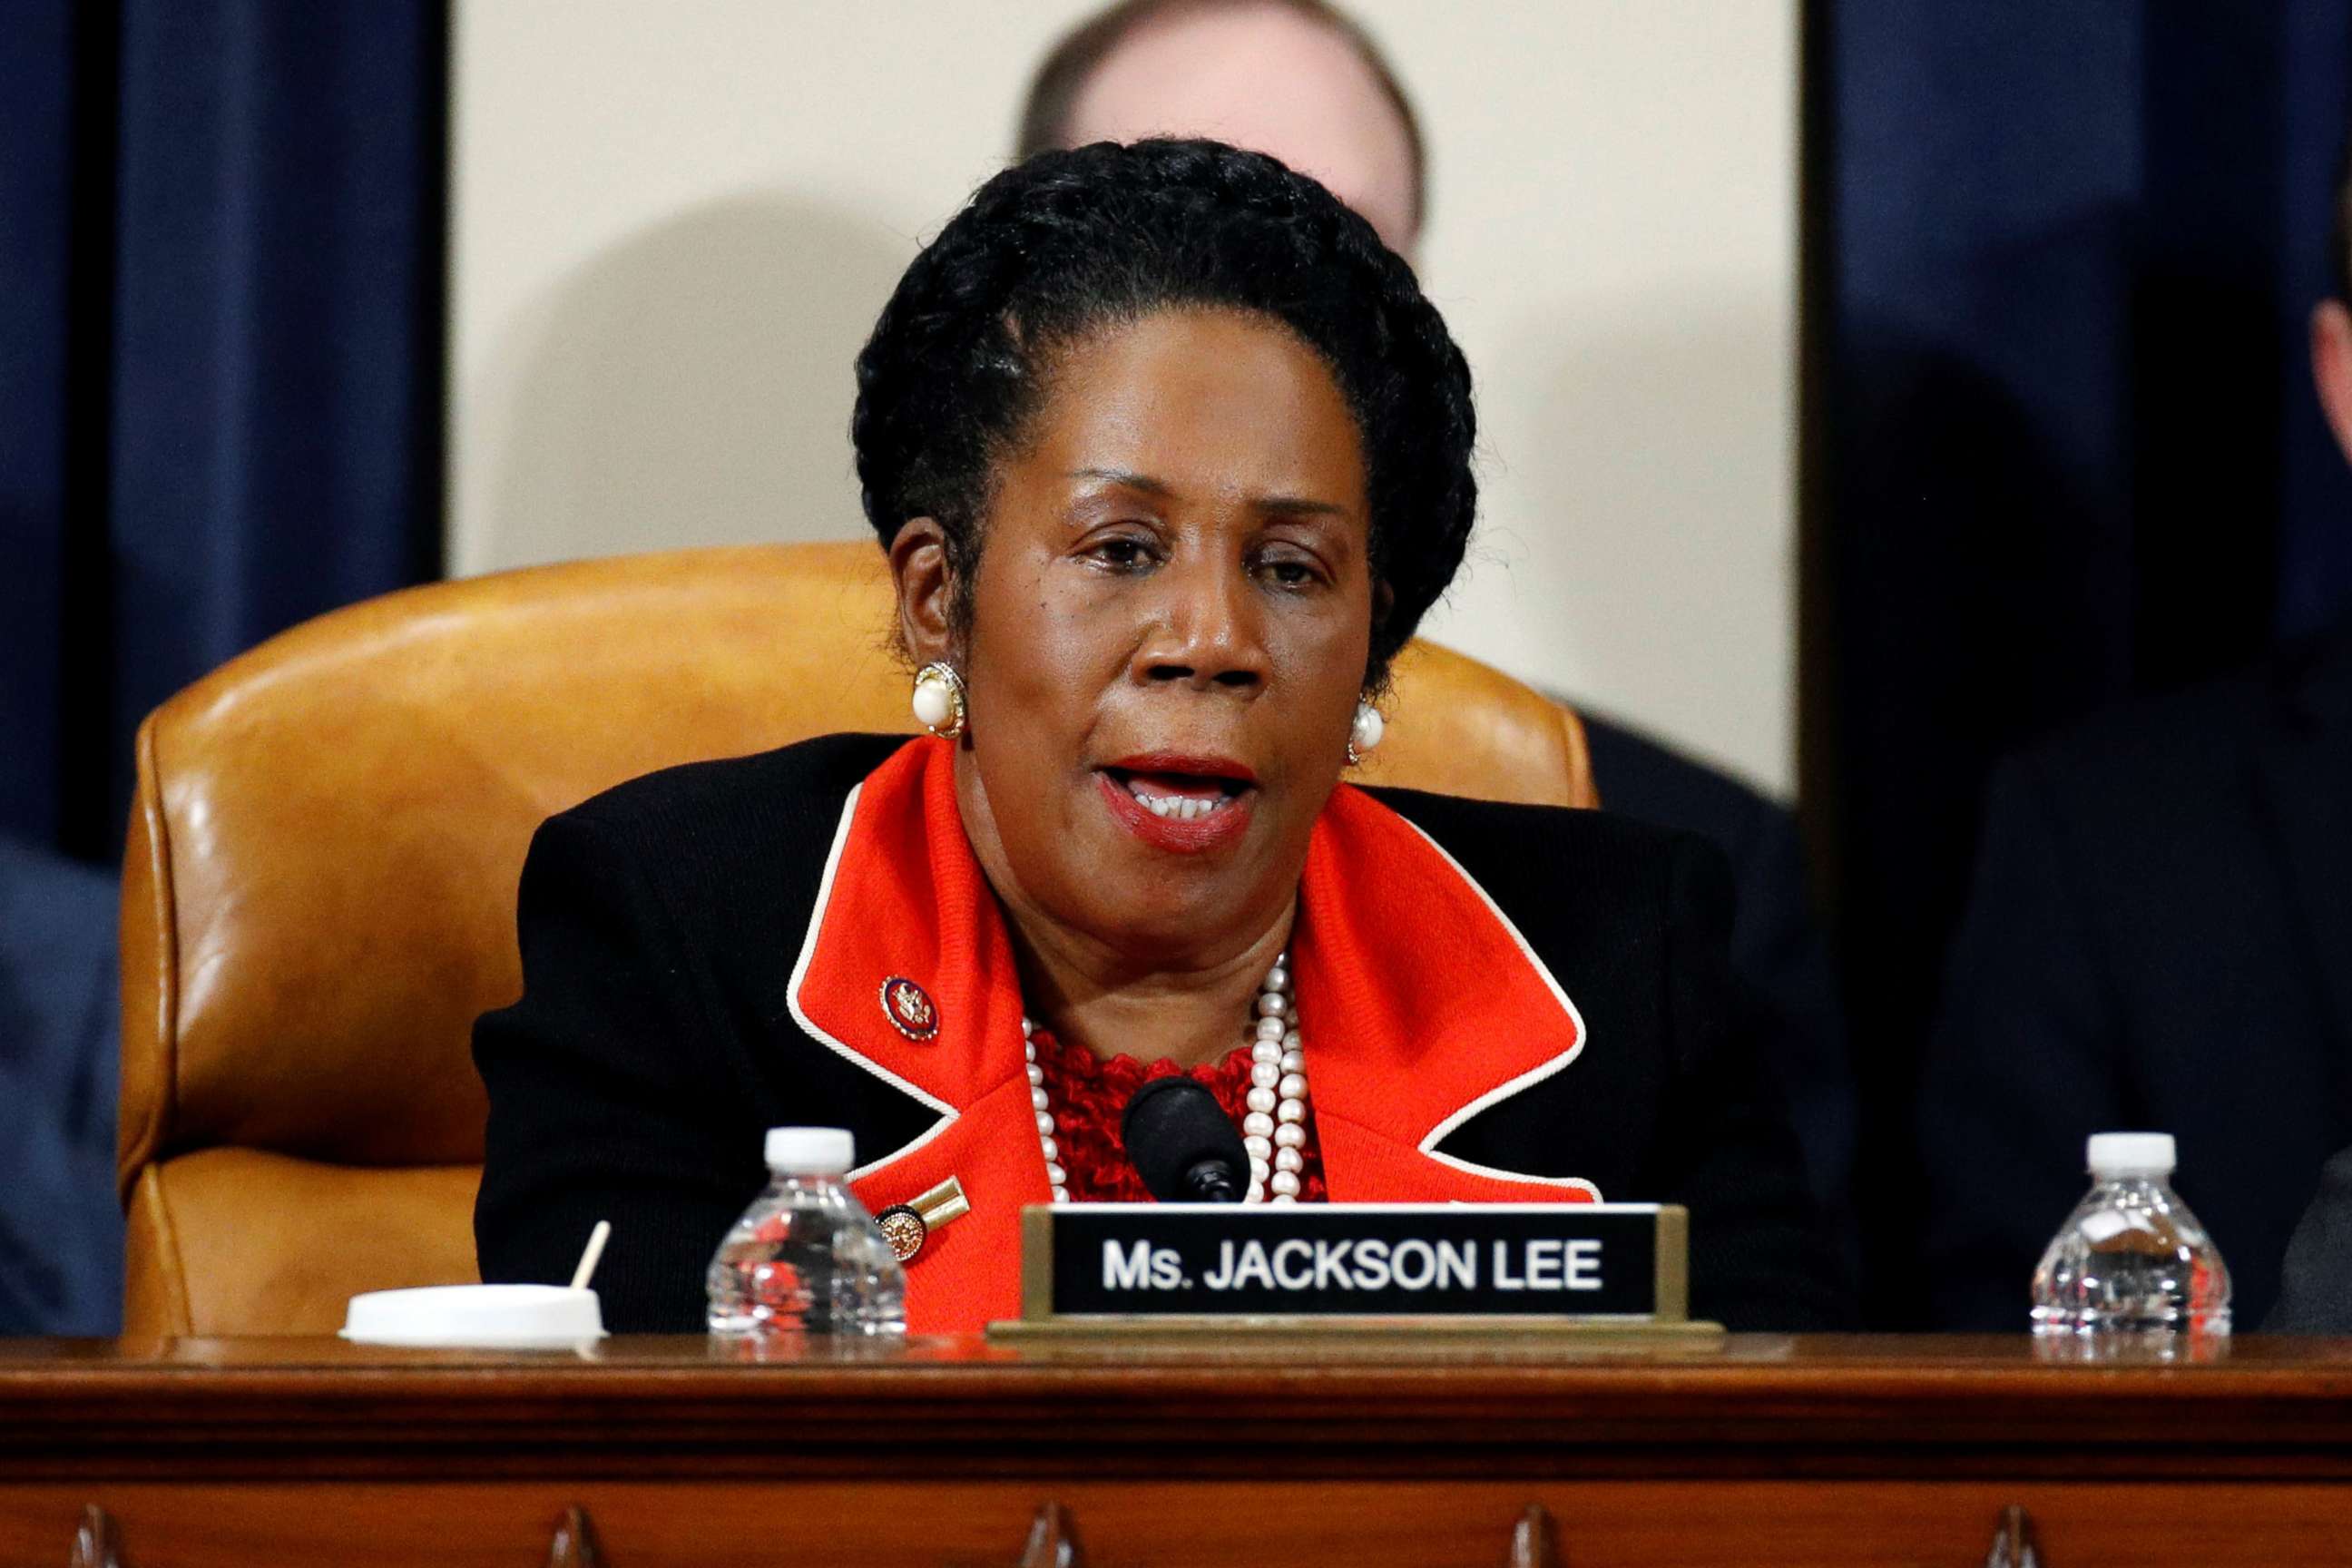 PHOTO: Rep. Sheila Jackson Lee is shown during a House Judiciary Committee meeting on Capitol Hill, in Washington, Dec. 13, 2019.